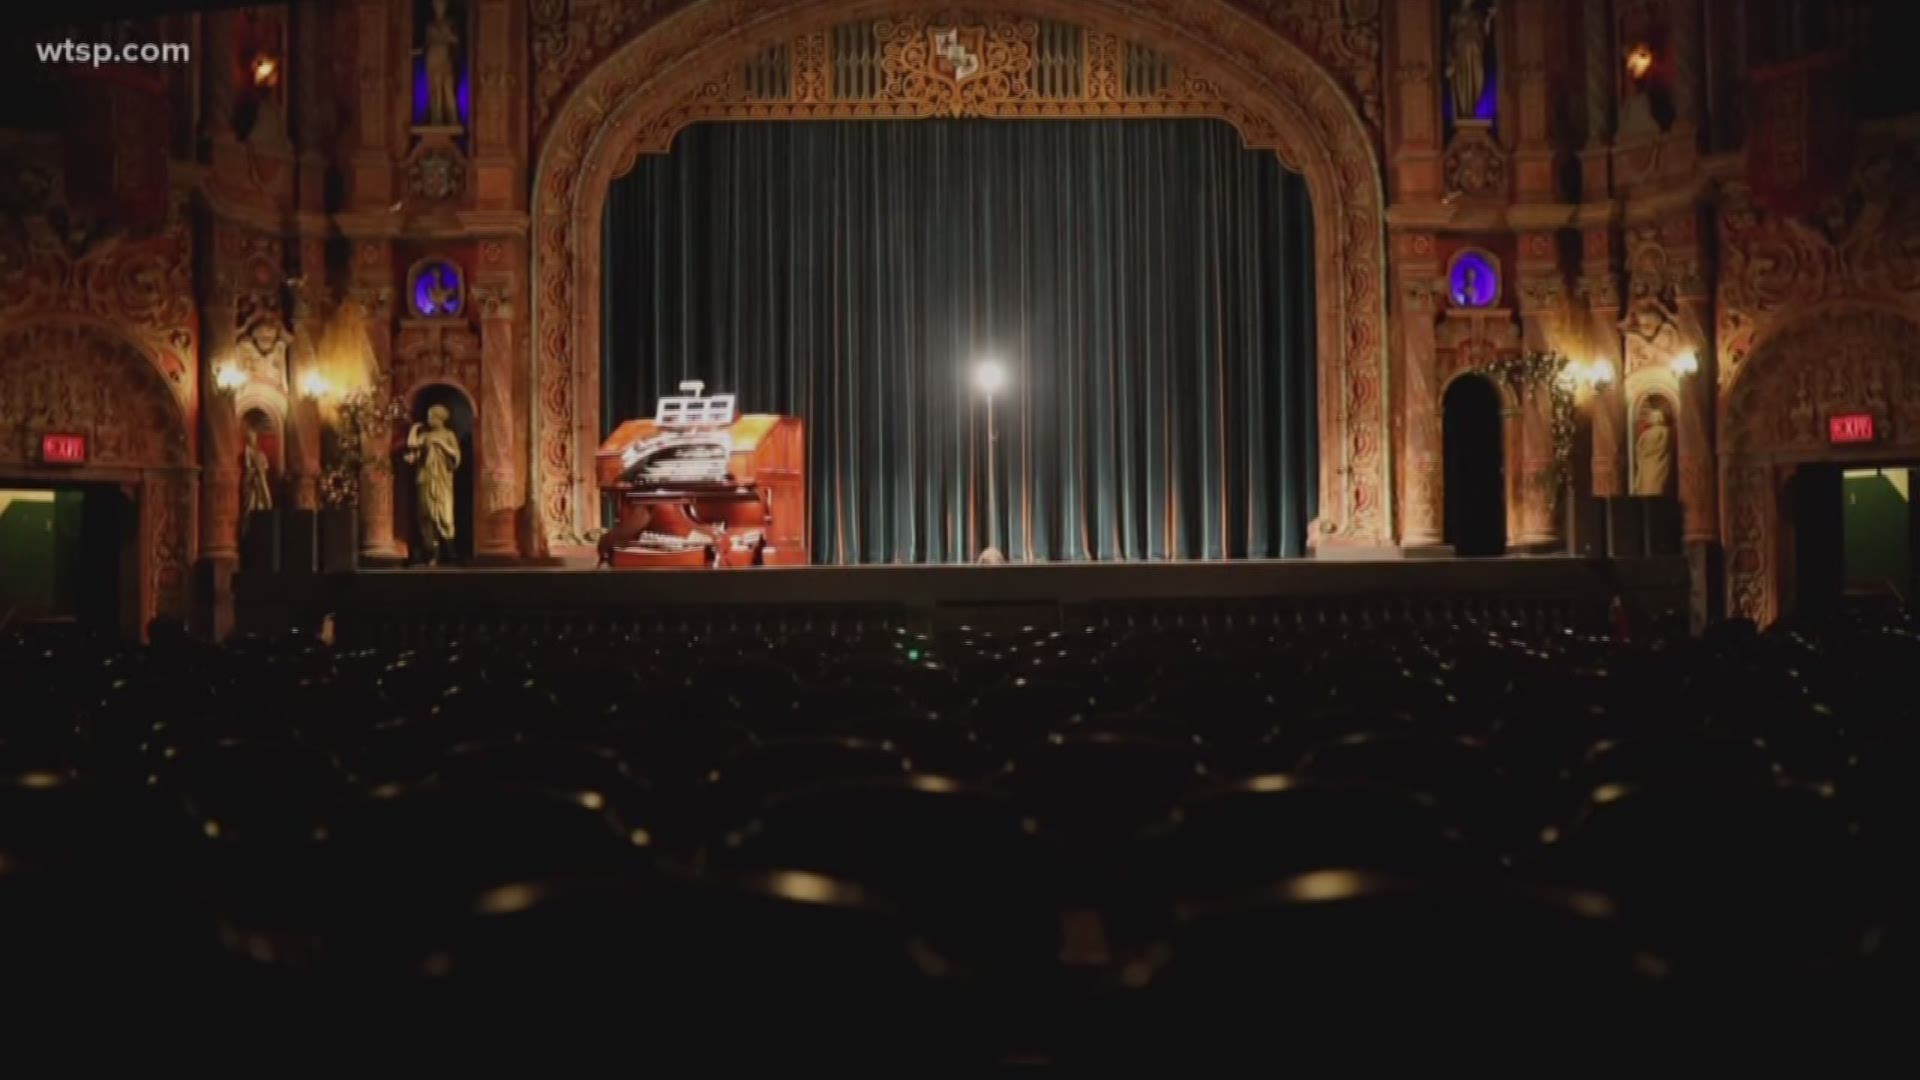 The Tampa Theatre is one of the few original movie Palaces still standing. Built in 1926, it's home to the original organ as well.